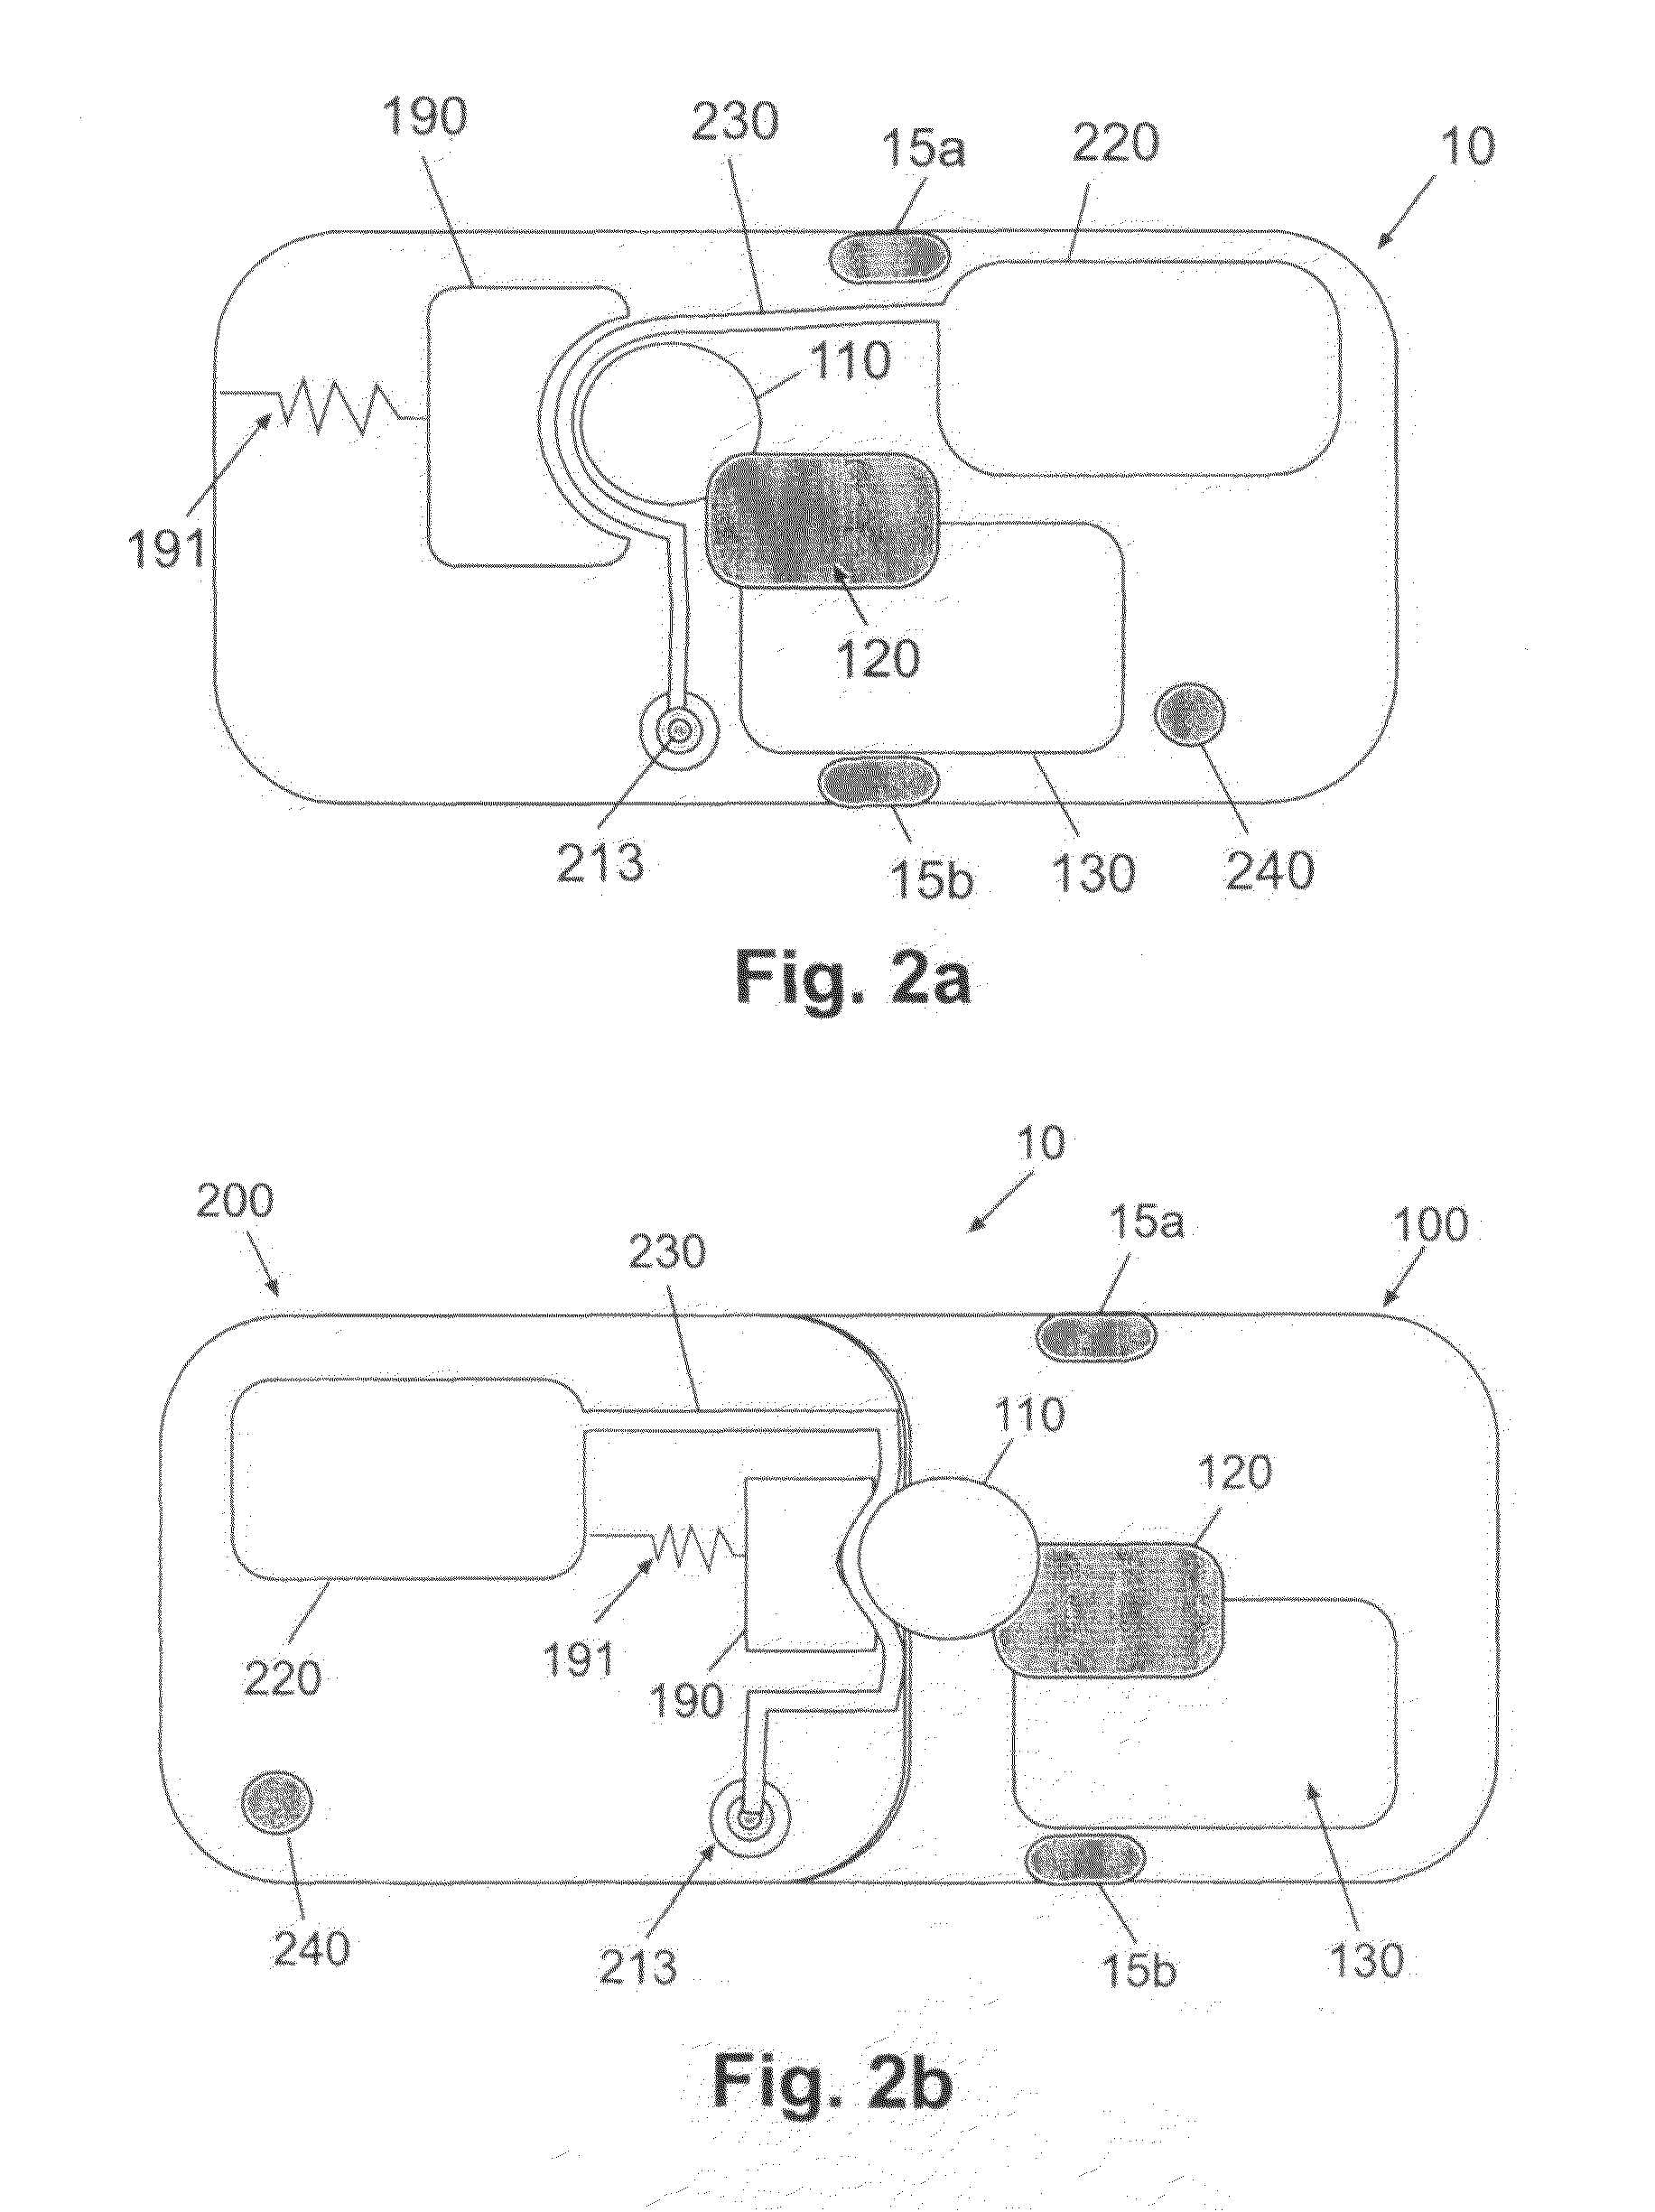 Methods and appratus for monitoring rotation of an infusion pump driving mechanism